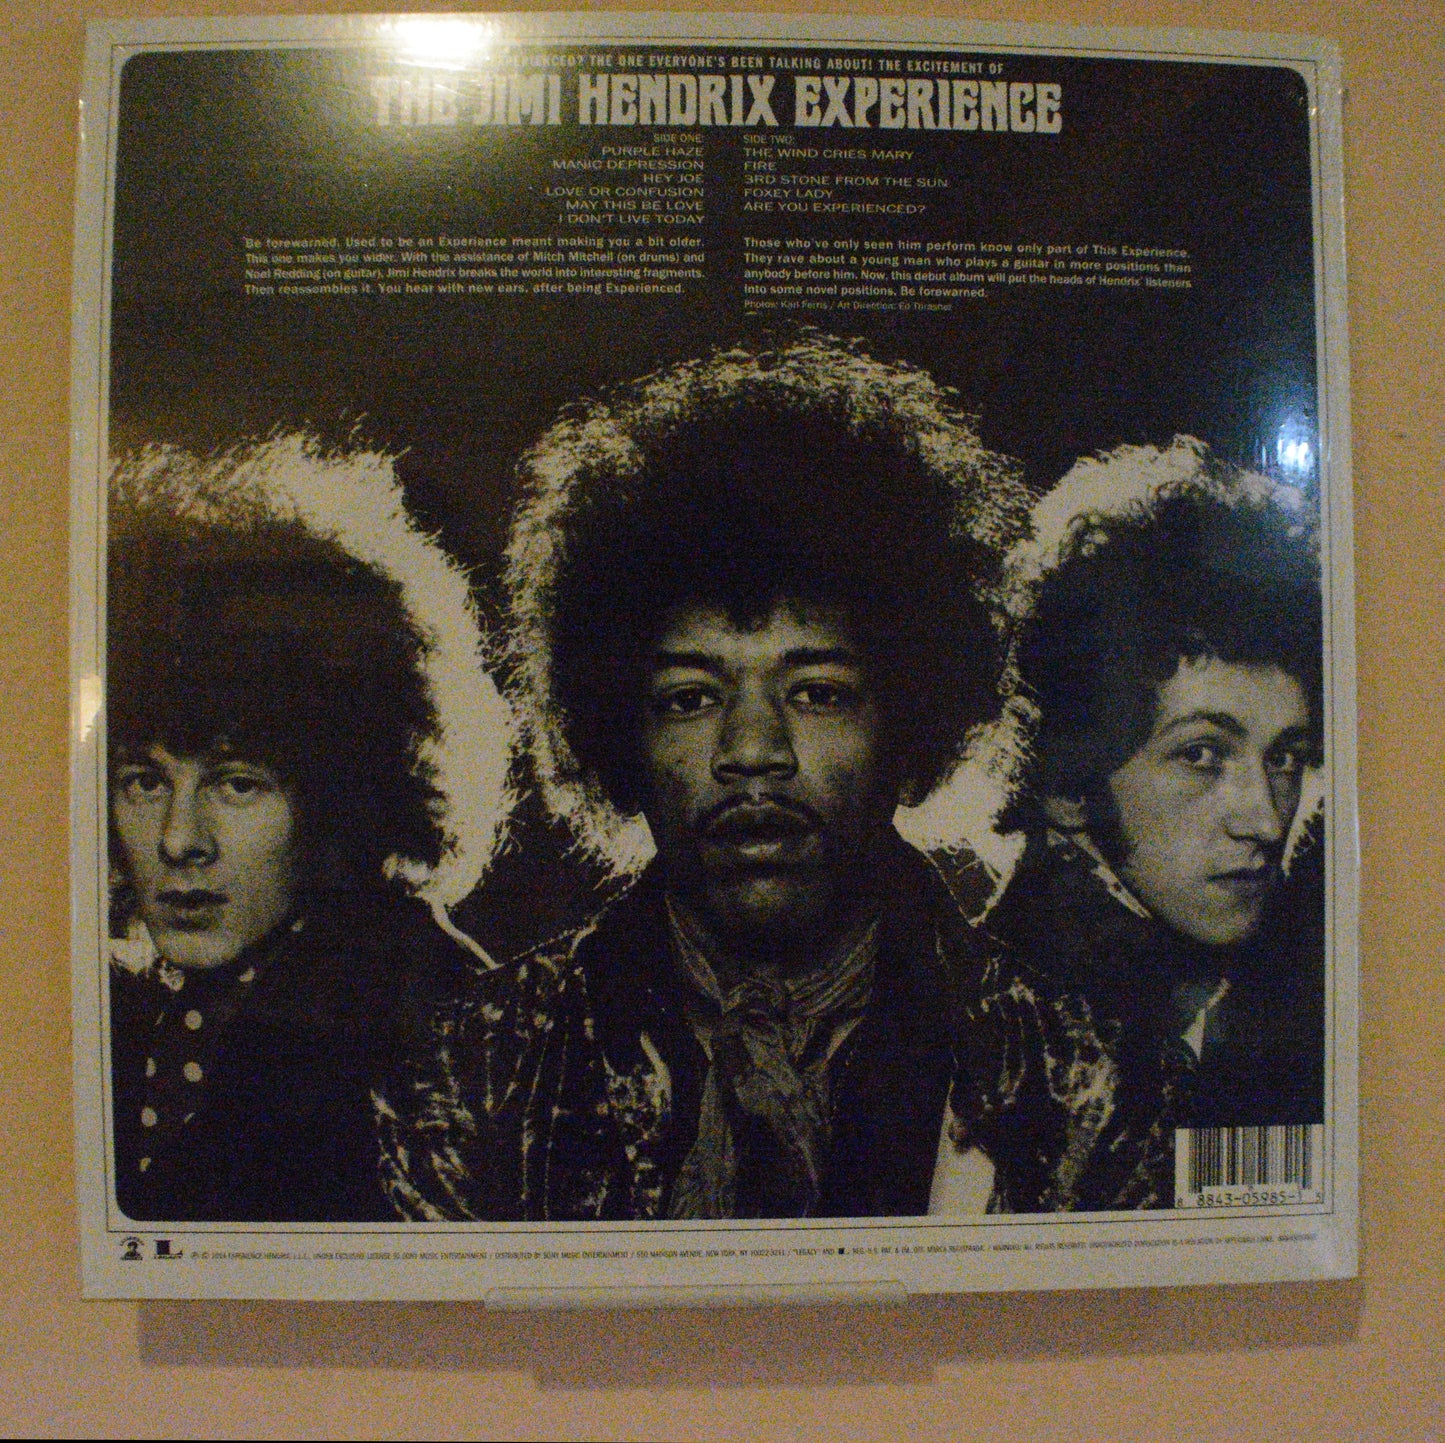 The Jimi Hendrix Experience - Are You Experienced LP